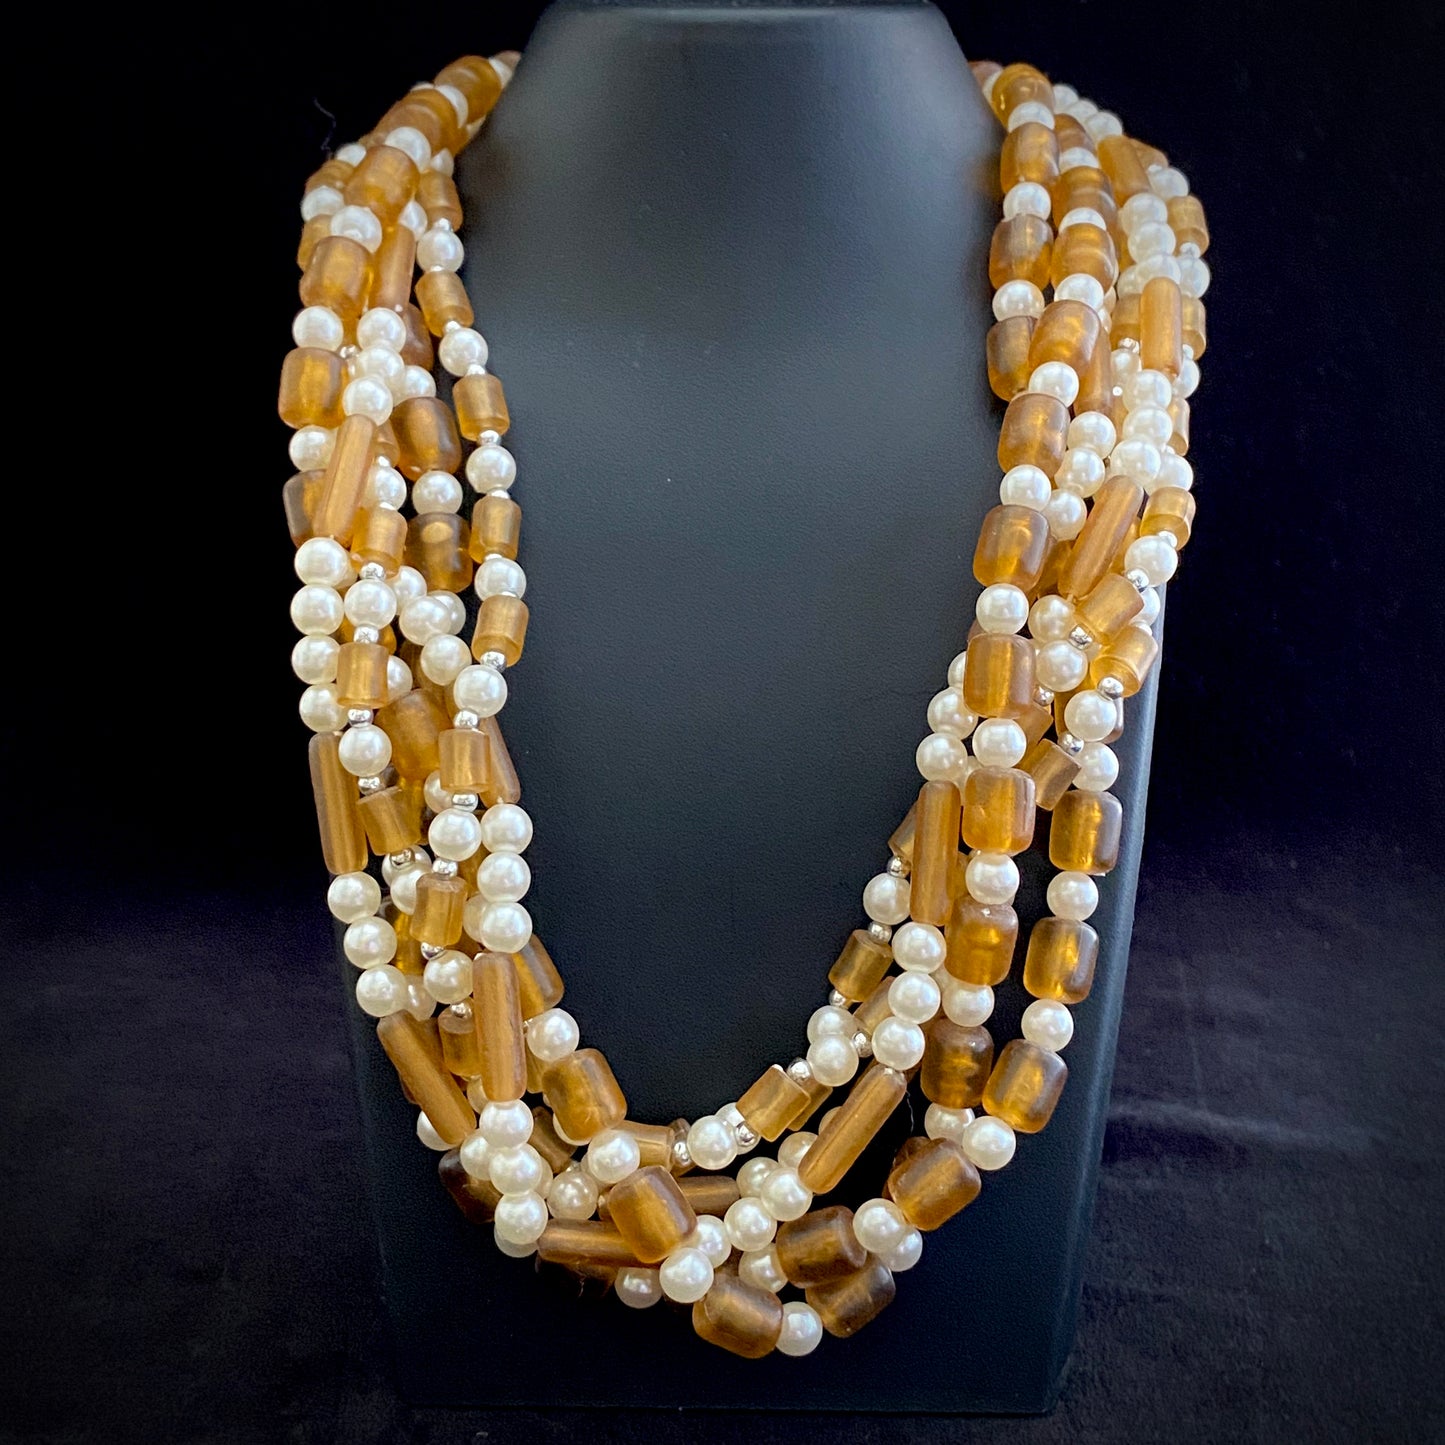 60s/70s Unsigned Faux Pearl & Bead Necklace